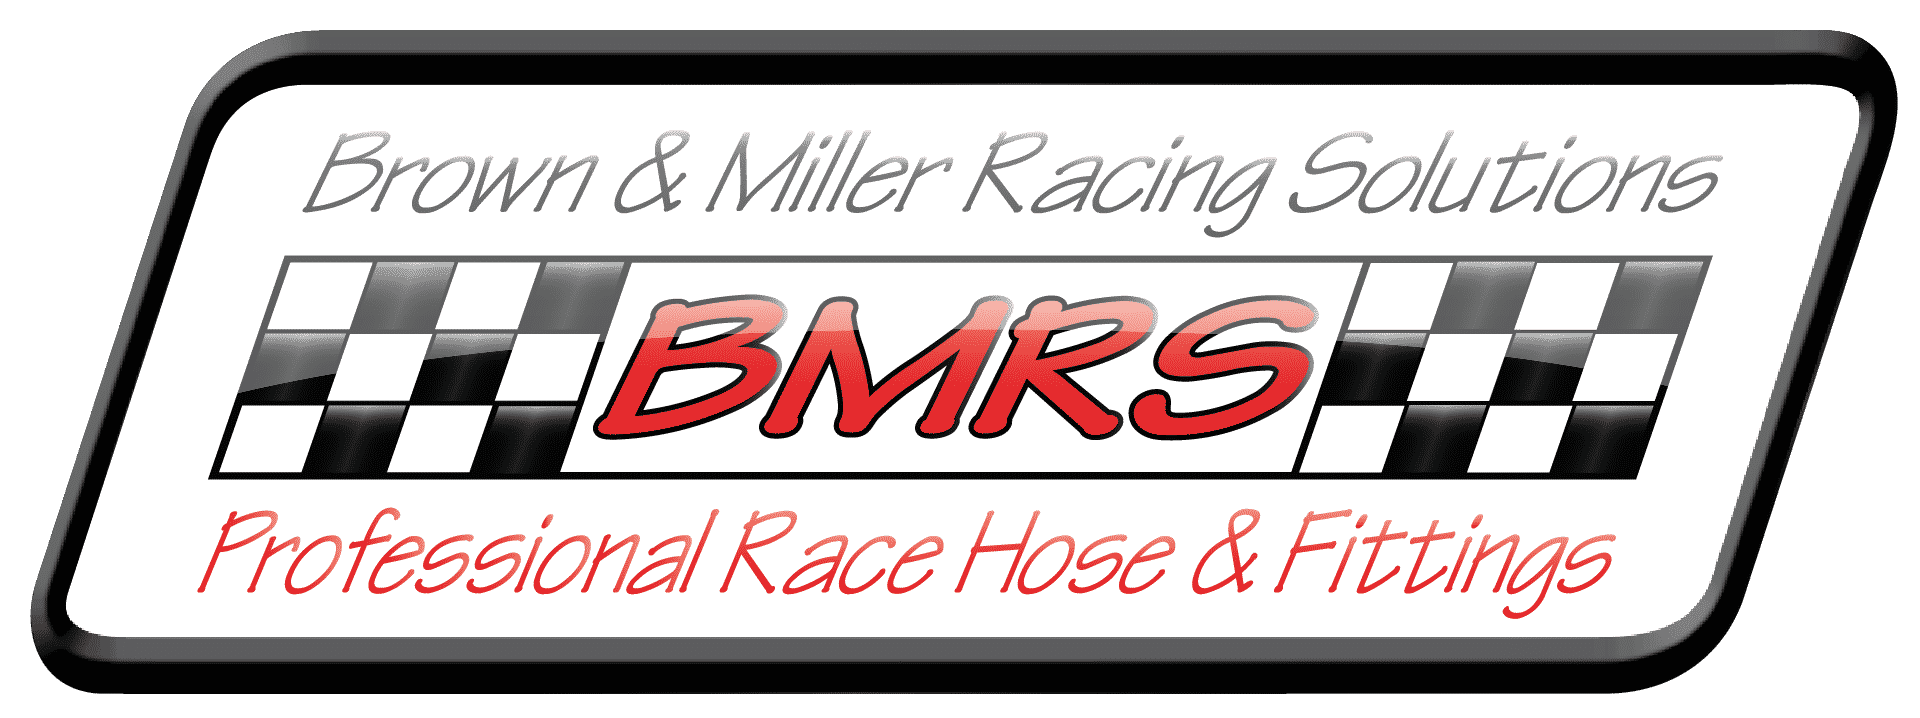 BMRS - Brown and Miller Racing Solutions